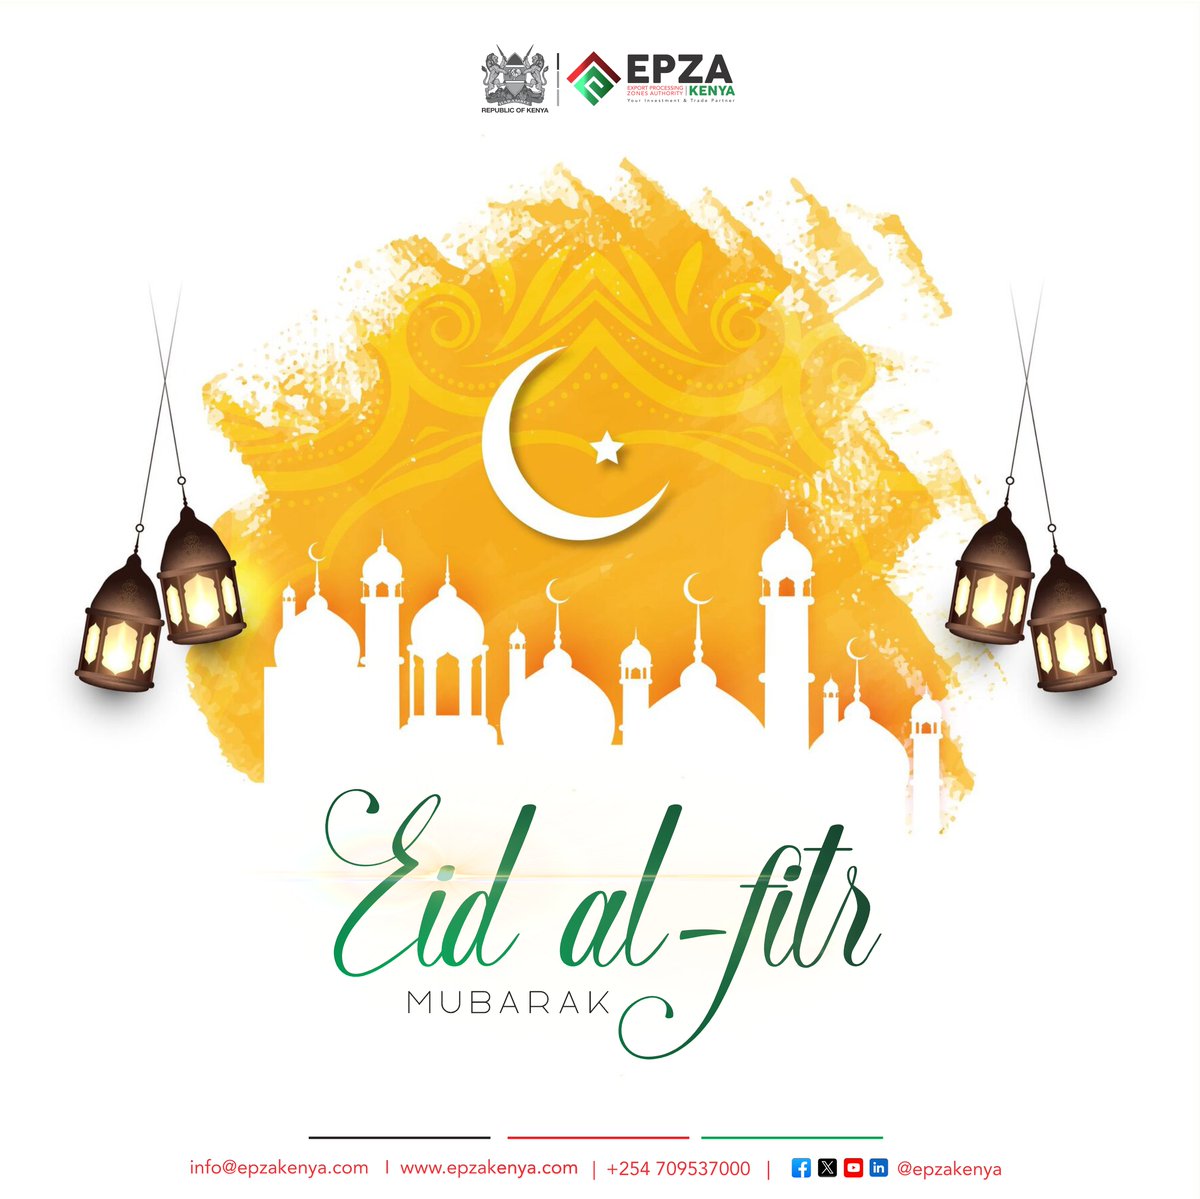 Eid-ul-Fitr is a time for gratitude, reflection, and celebration. Wishing you a blessed and joyful Eid ul Fitr with your loved ones. #eidmubarak #eid2024